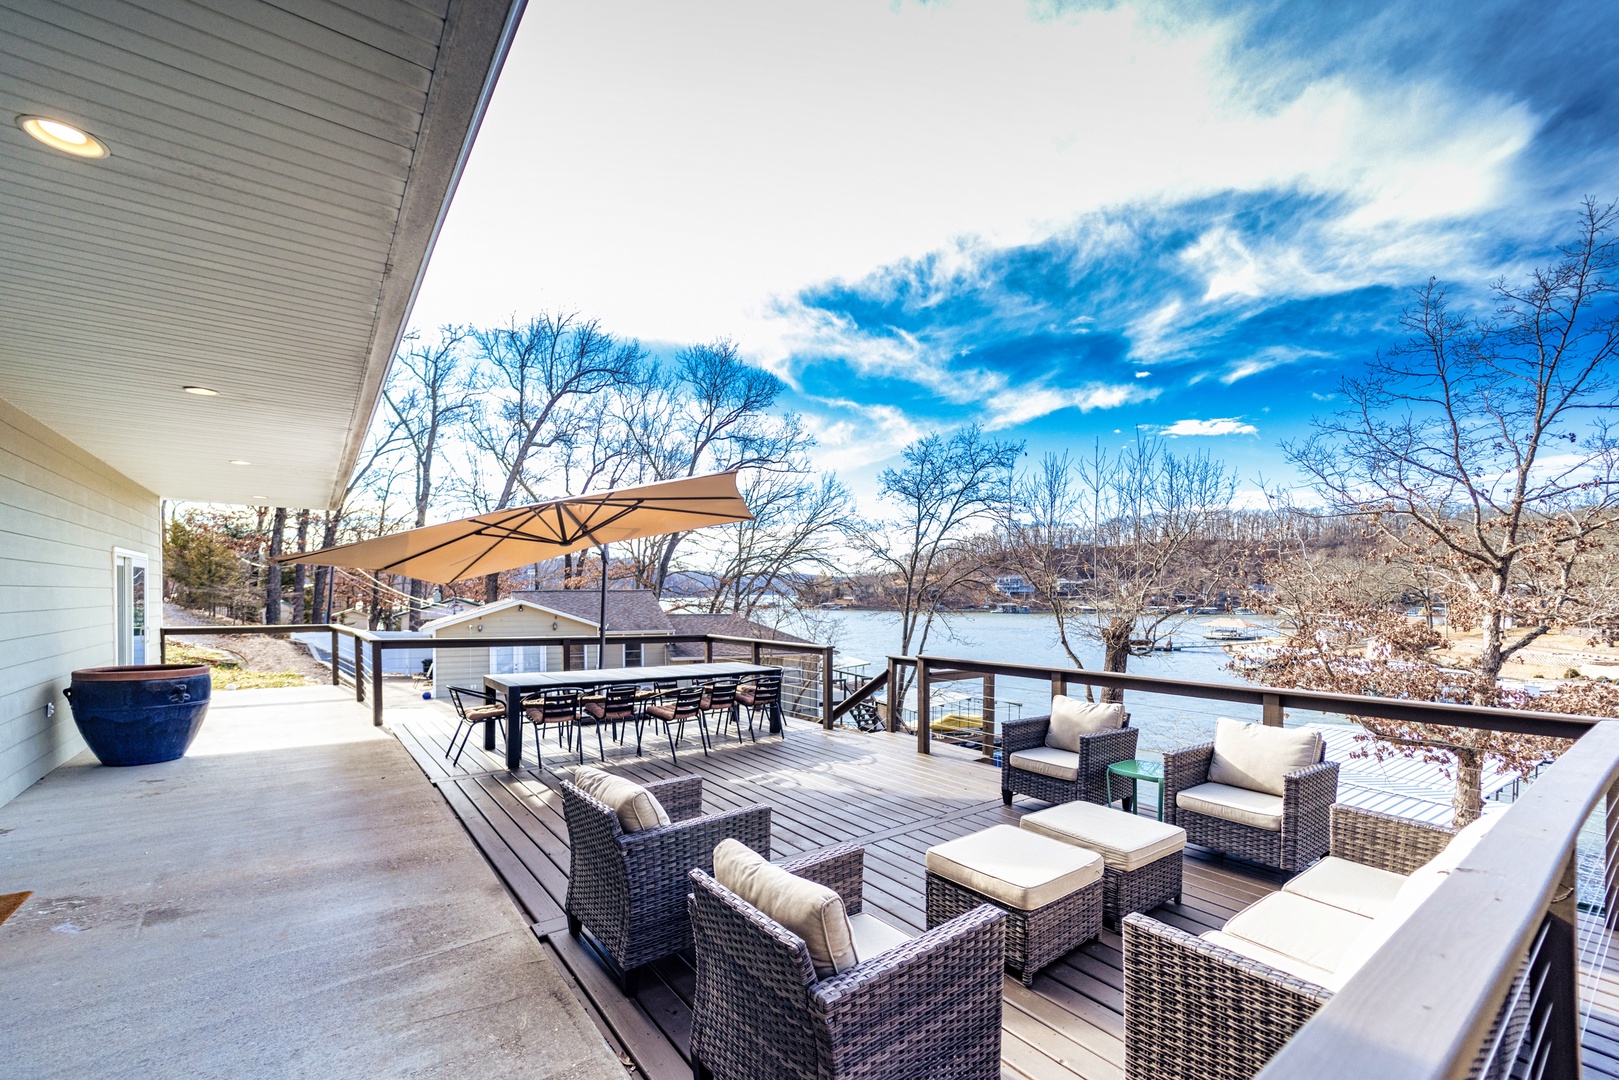 Lounge in the sunshine with gorgeous views on the large back deck